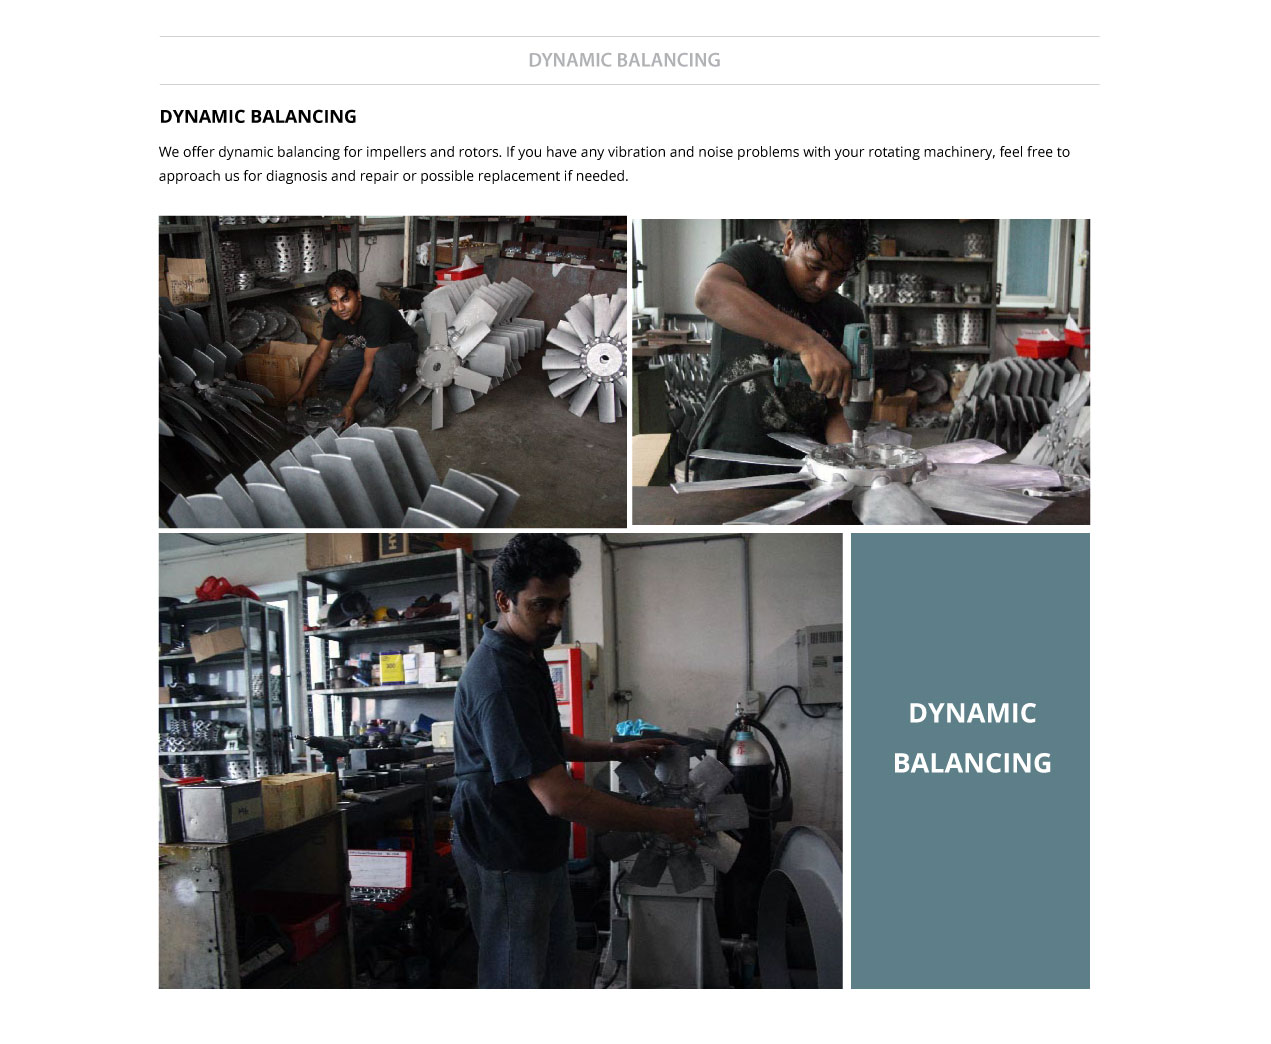 we offer dynamic balancing for impellers and rotors. If you have any vibration and noise problems with your rotating machinery, feel free to approach us for diagnosis and repair or possible replacement if needed